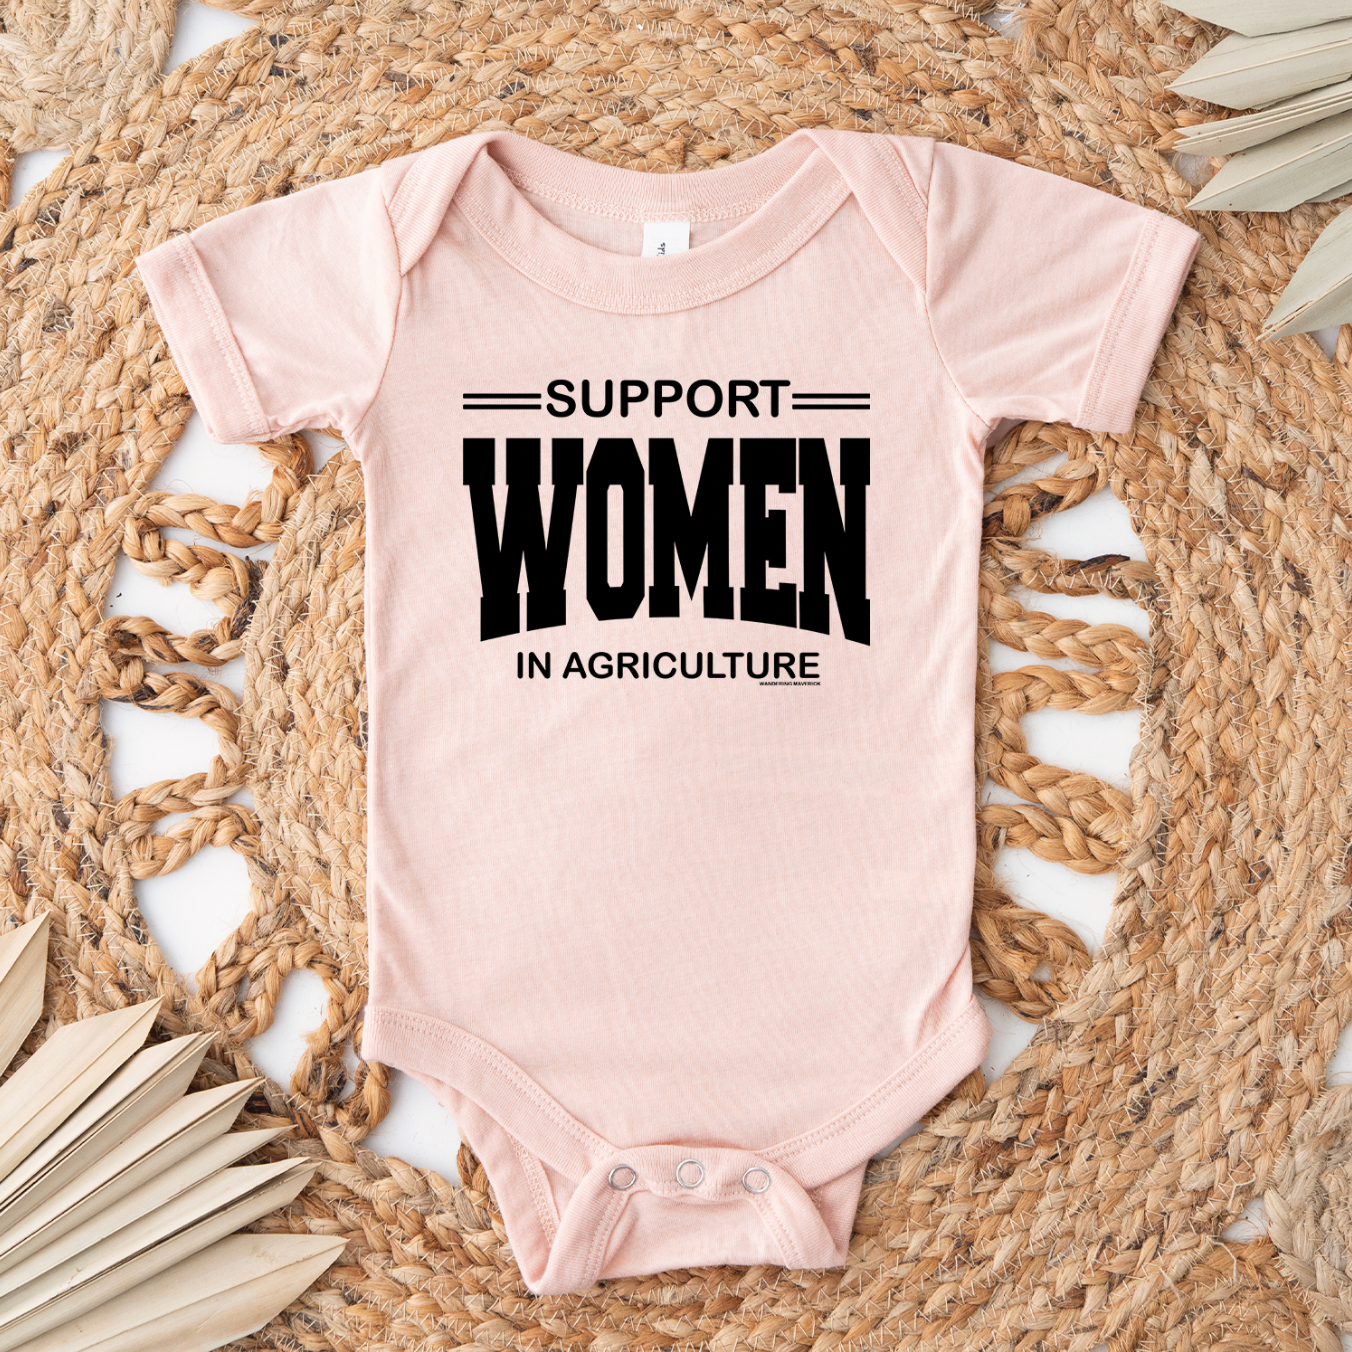 Support Women In Agriculture Black Ink One Piece/T-Shirt (Newborn - Youth XL) - Multiple Colors!